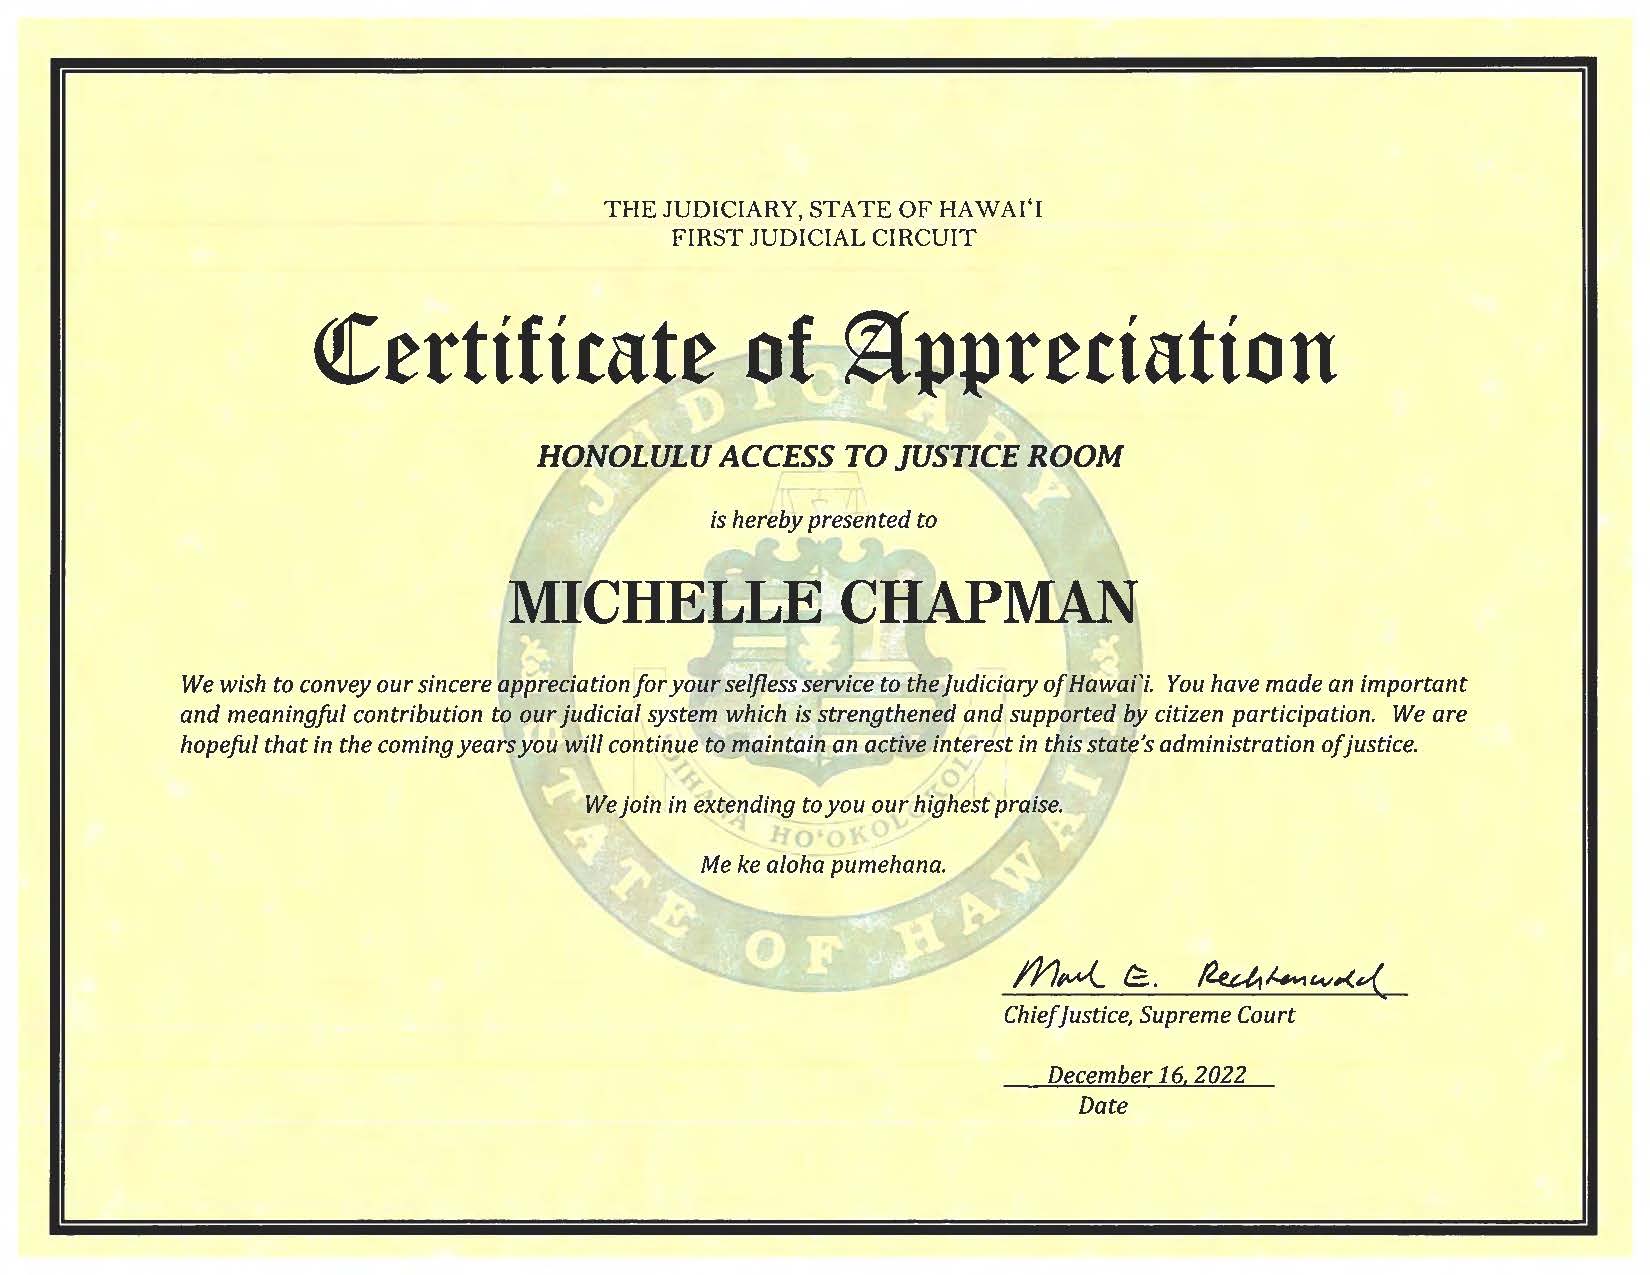 Image of appreciation award fro Hawaii Supreme Court to Michelle Chapman